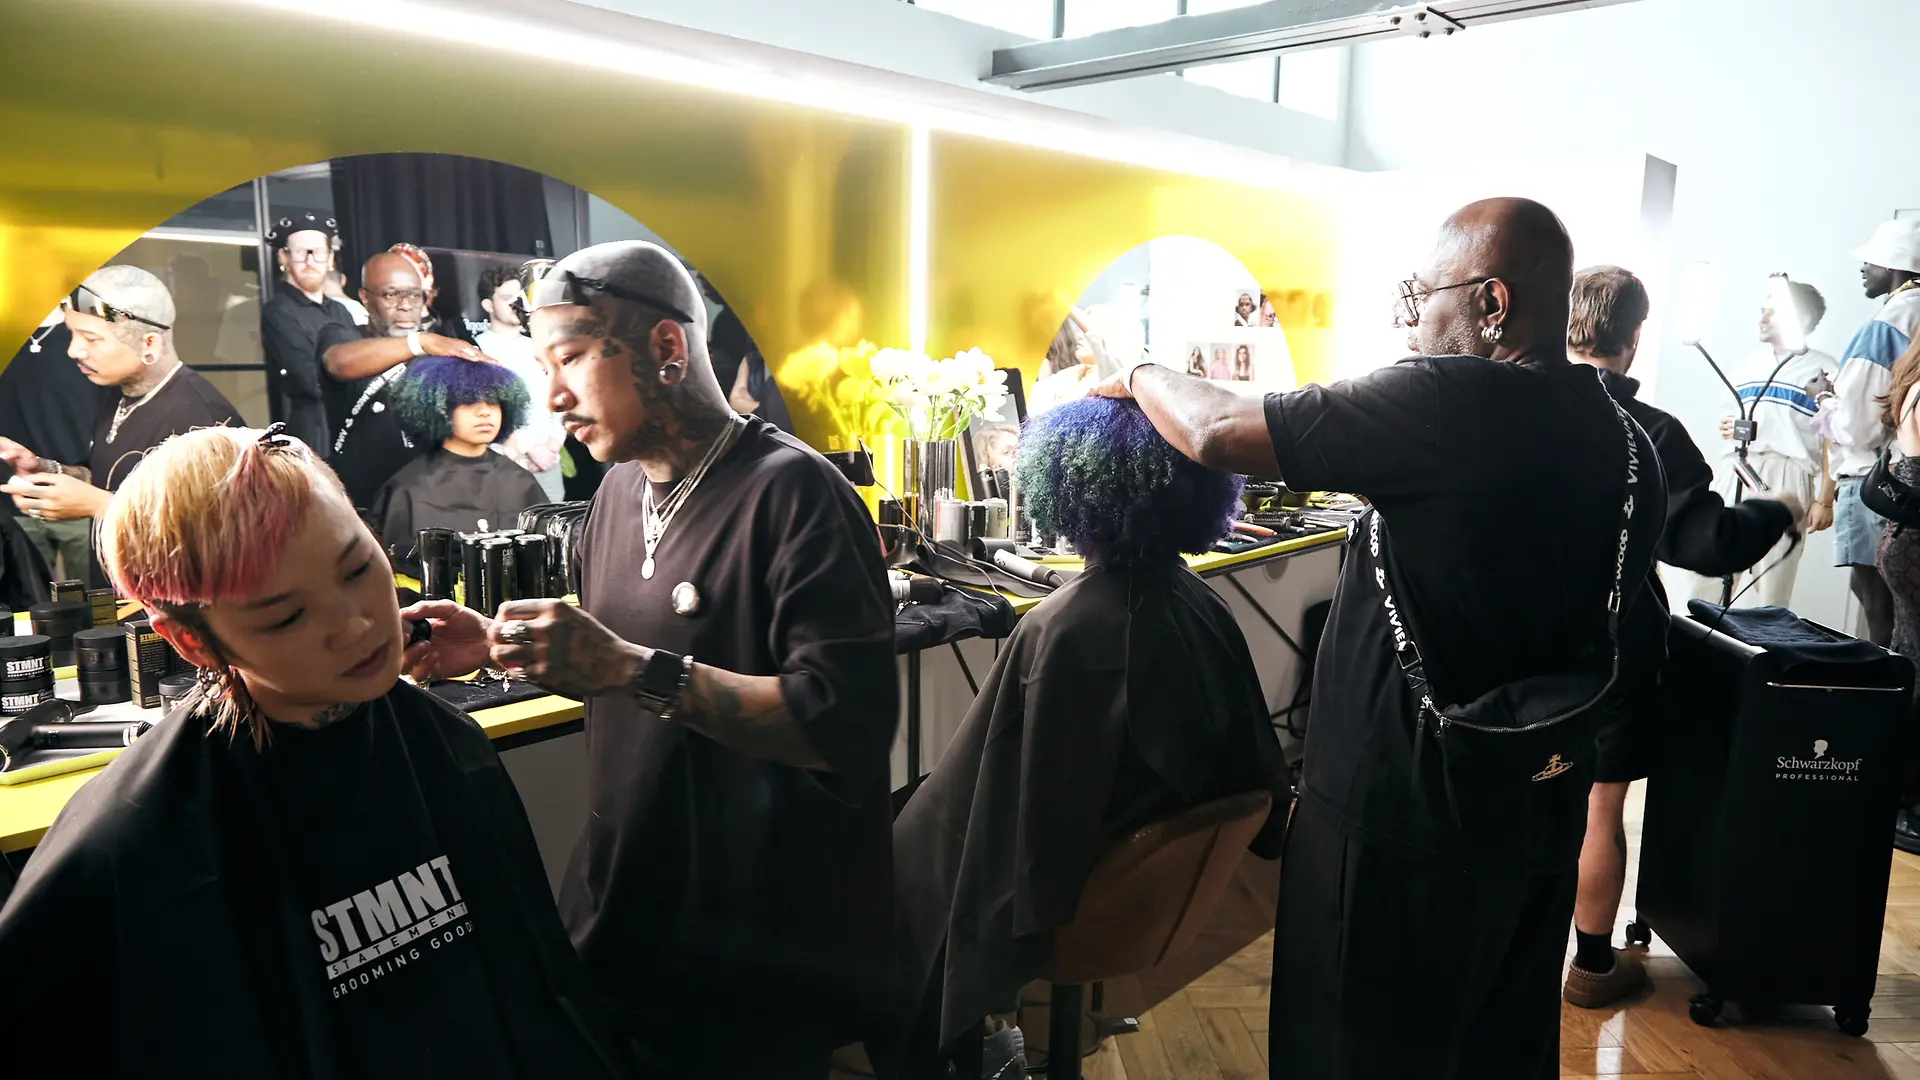 Schwarzkopf and Dazed create HEADtoHEAD, an inspirational day for readers and hair professionals